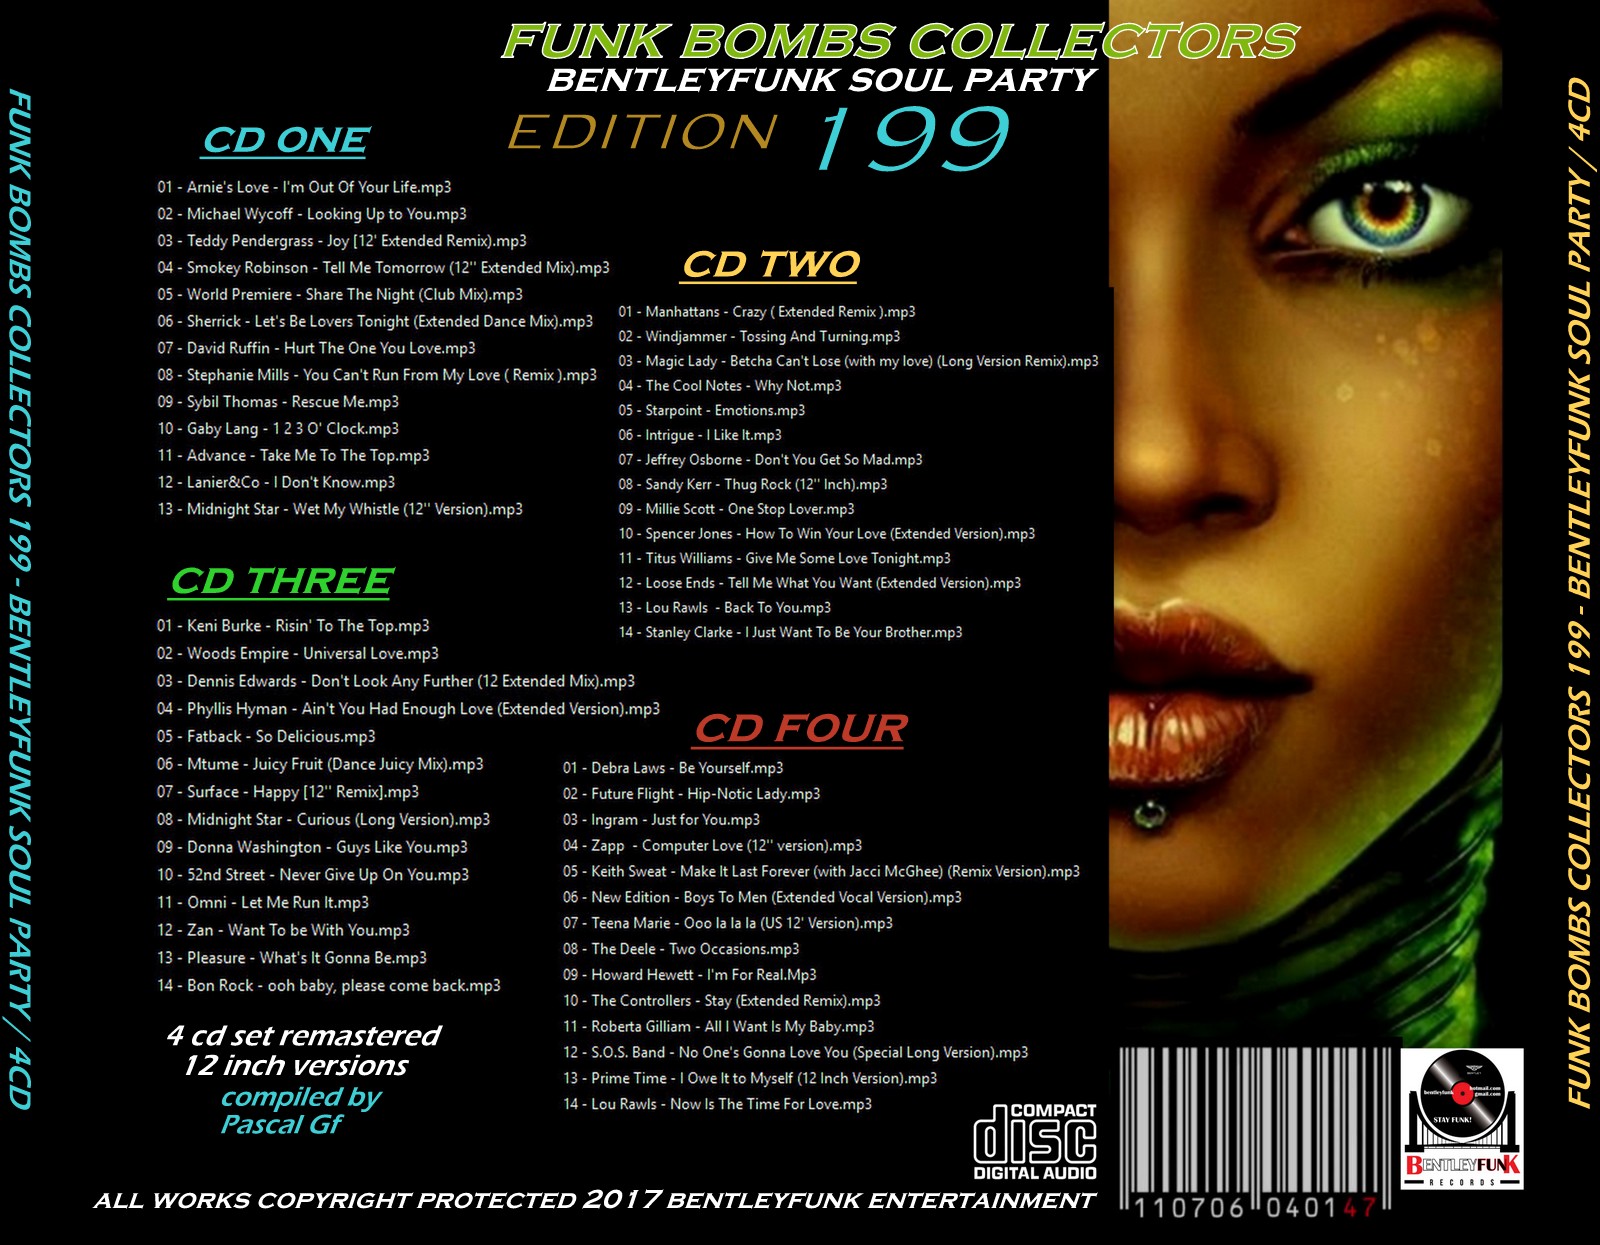 Extended remix mp3. Funk Love mp3. Remix mp3. Long Version mp3. The s.o.s Band - no one's gonna Love you.